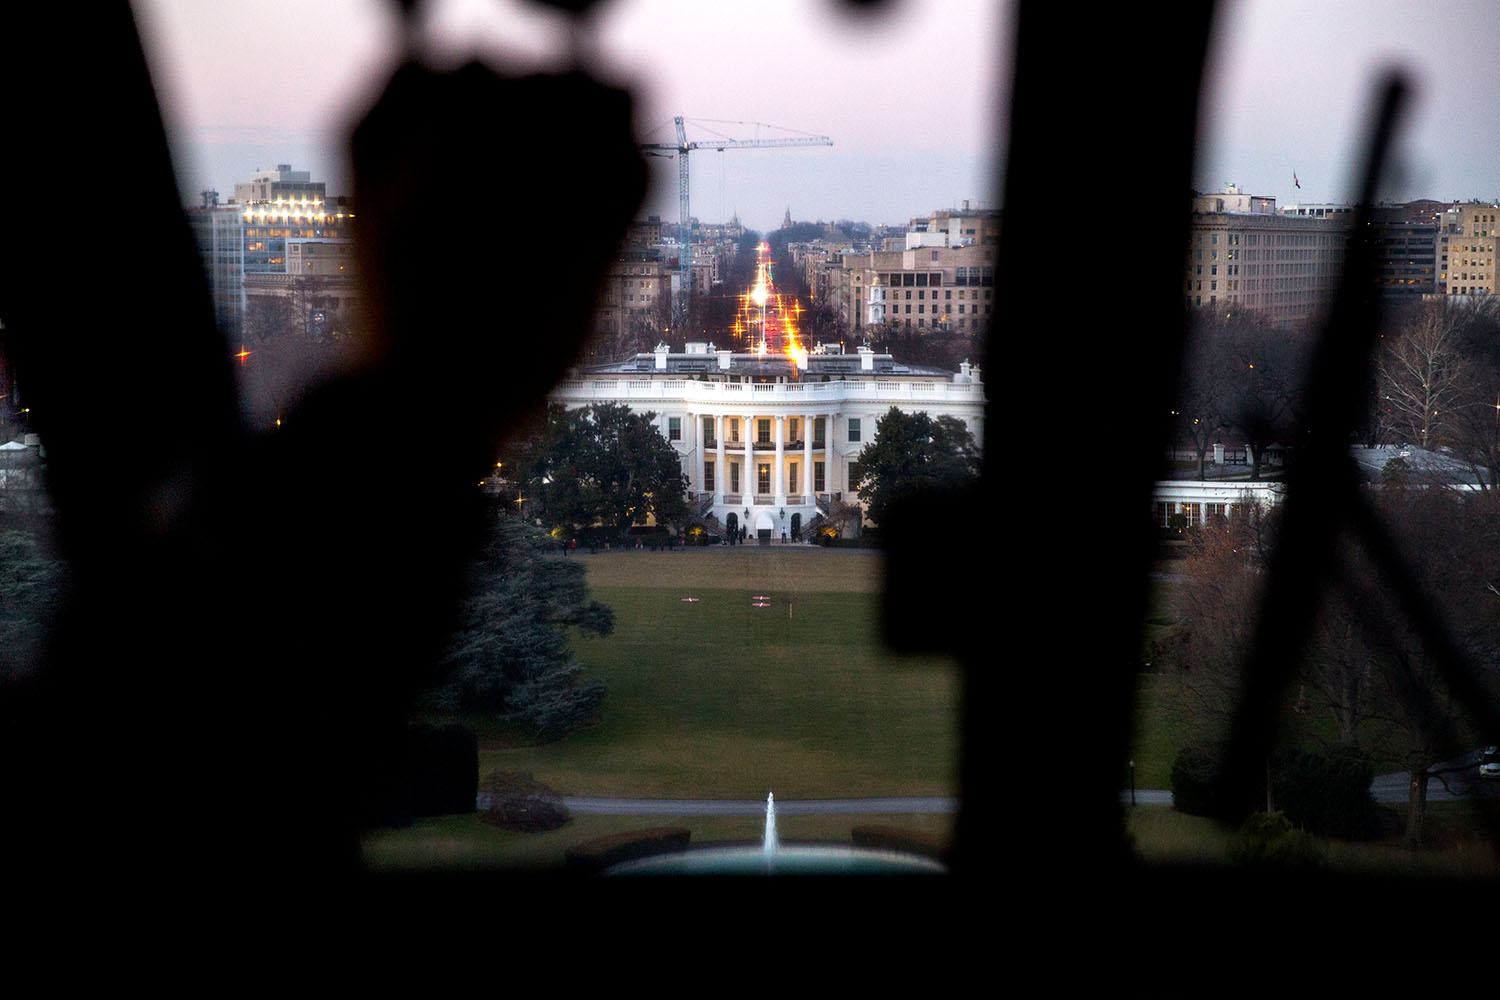 Aerial view of the White House taken from the cockpit of Marine One upon arrival from Baltimore, Md., Jan. 15, 2015. Official White House Photo by Pete Souza